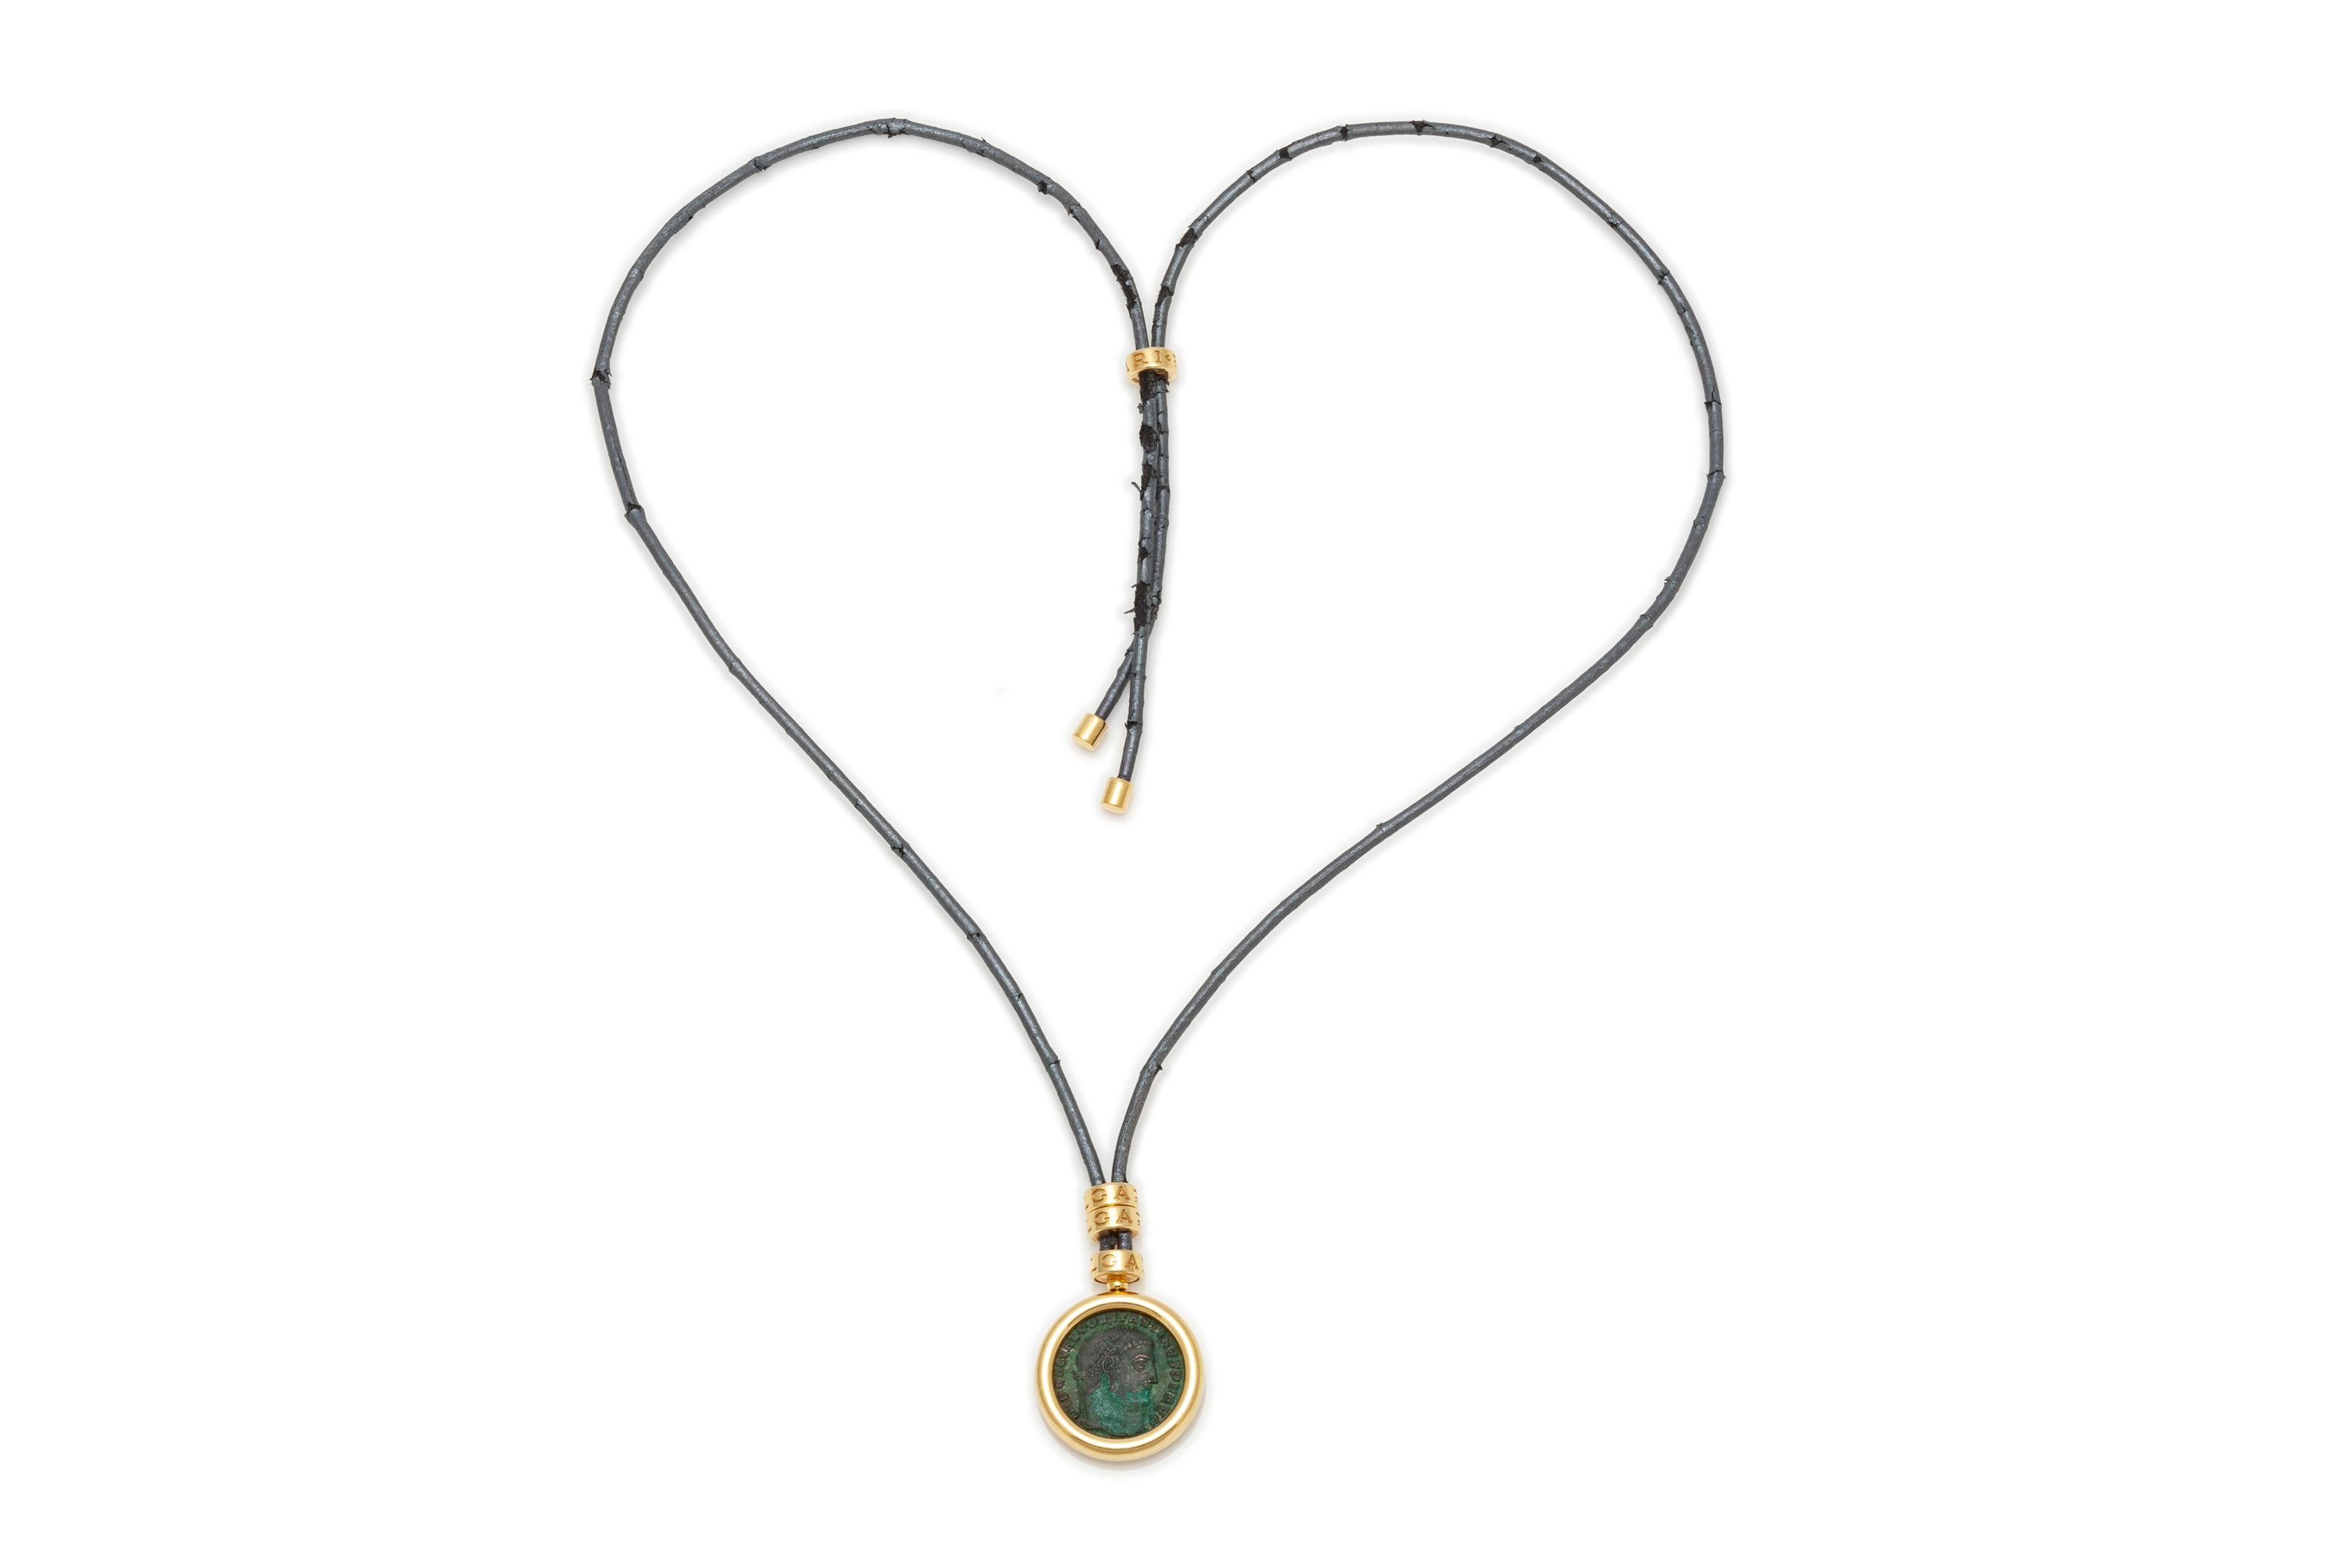 Necklace with a coin finely crafted in 18k gold on a cord. Signed by Bvlgari. Circa 1970's.